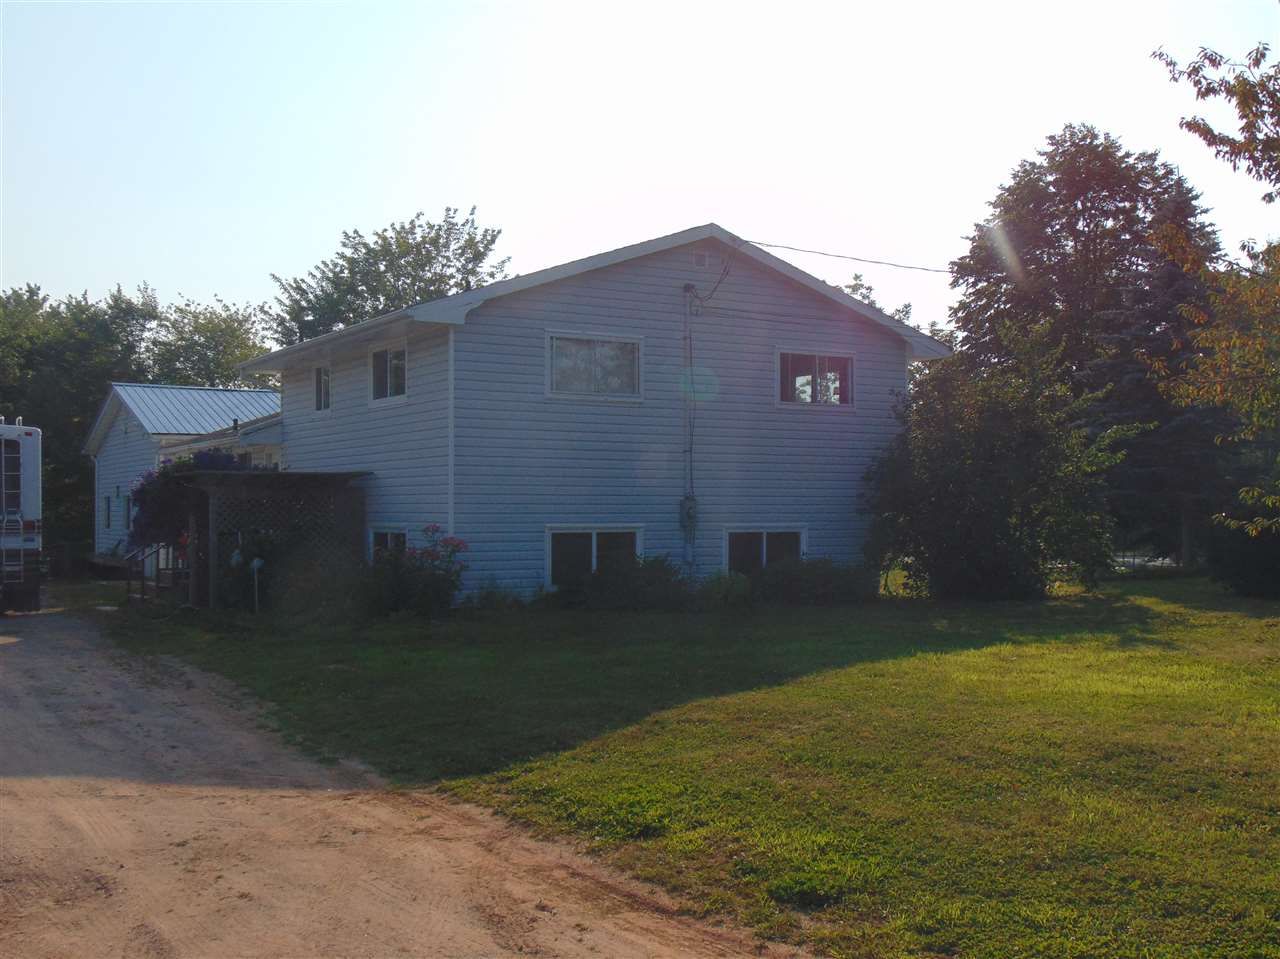 Main Photo: 4028 HIGHWAY 221 in Welsford: 404-Kings County Residential for sale (Annapolis Valley)  : MLS®# 201918616